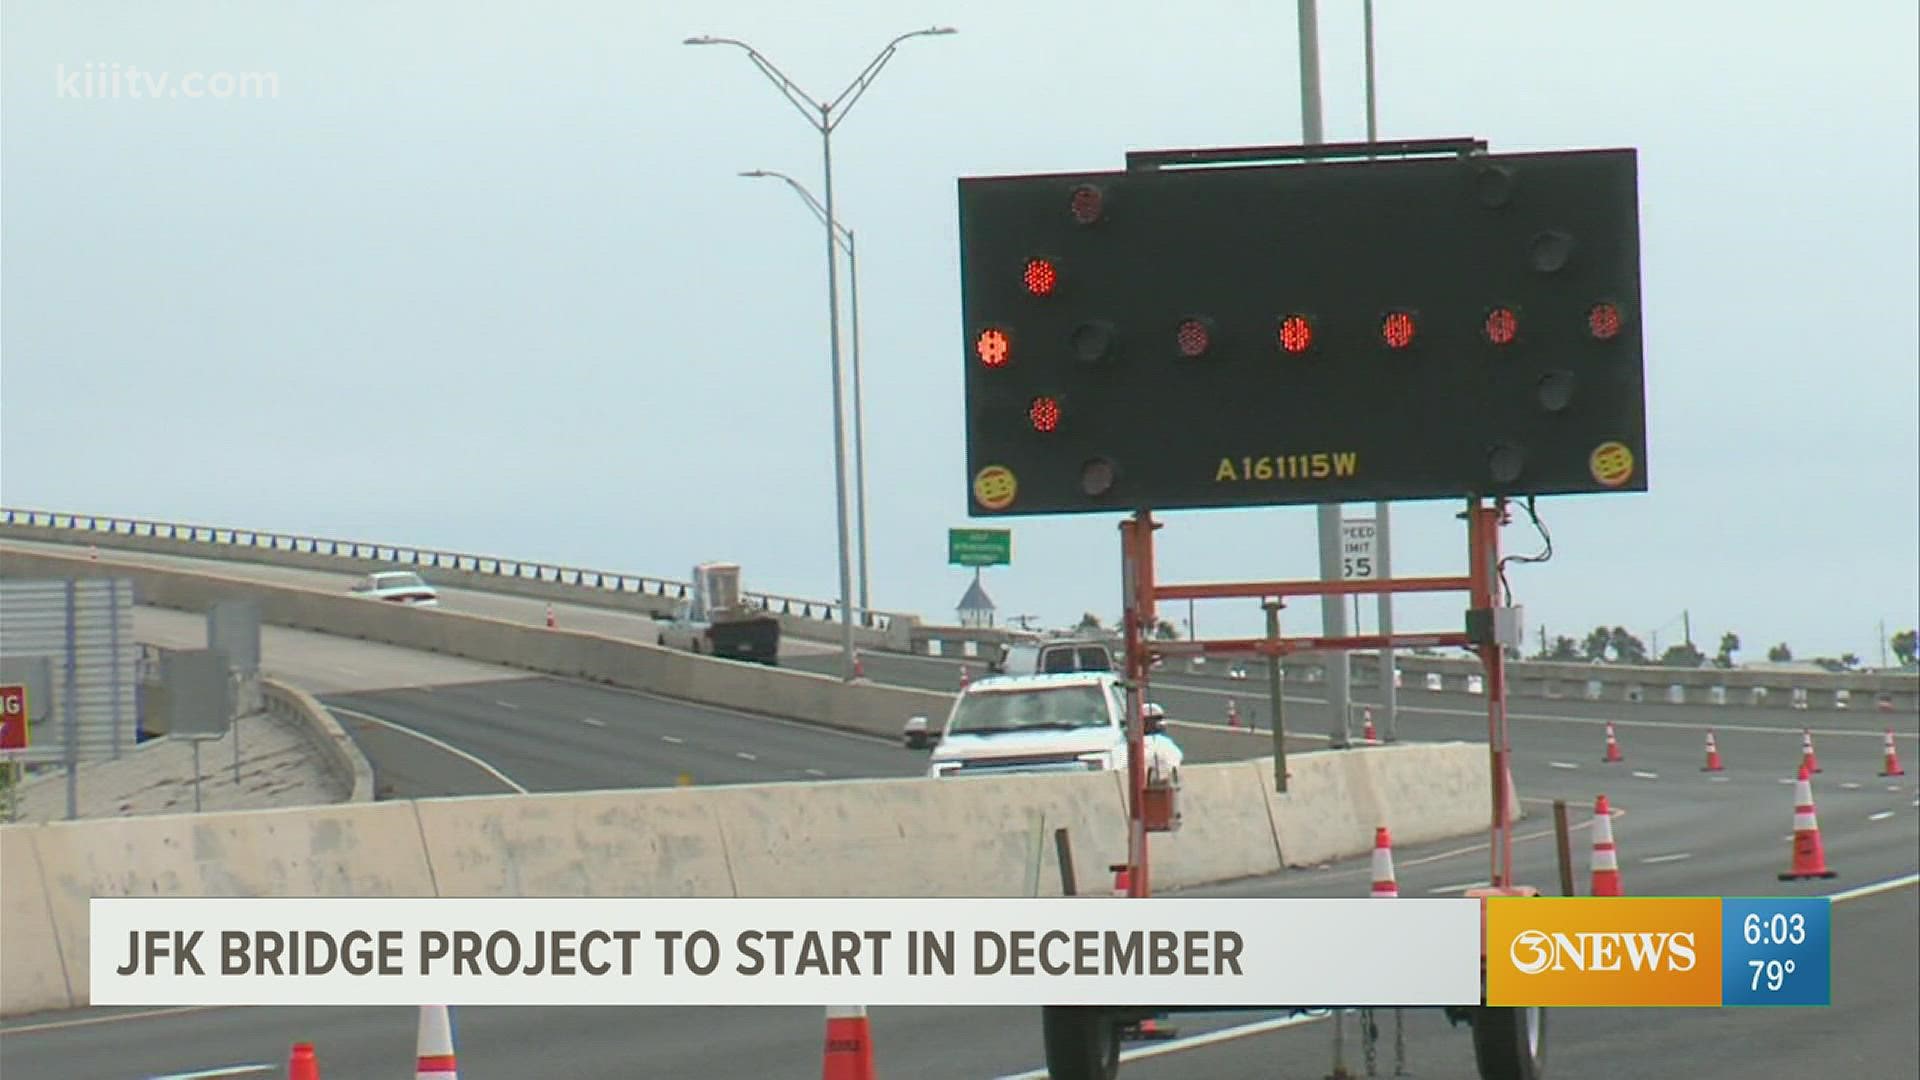 The JFK Bridge will soon be reduced from four lanes to two lanes for an entire year.